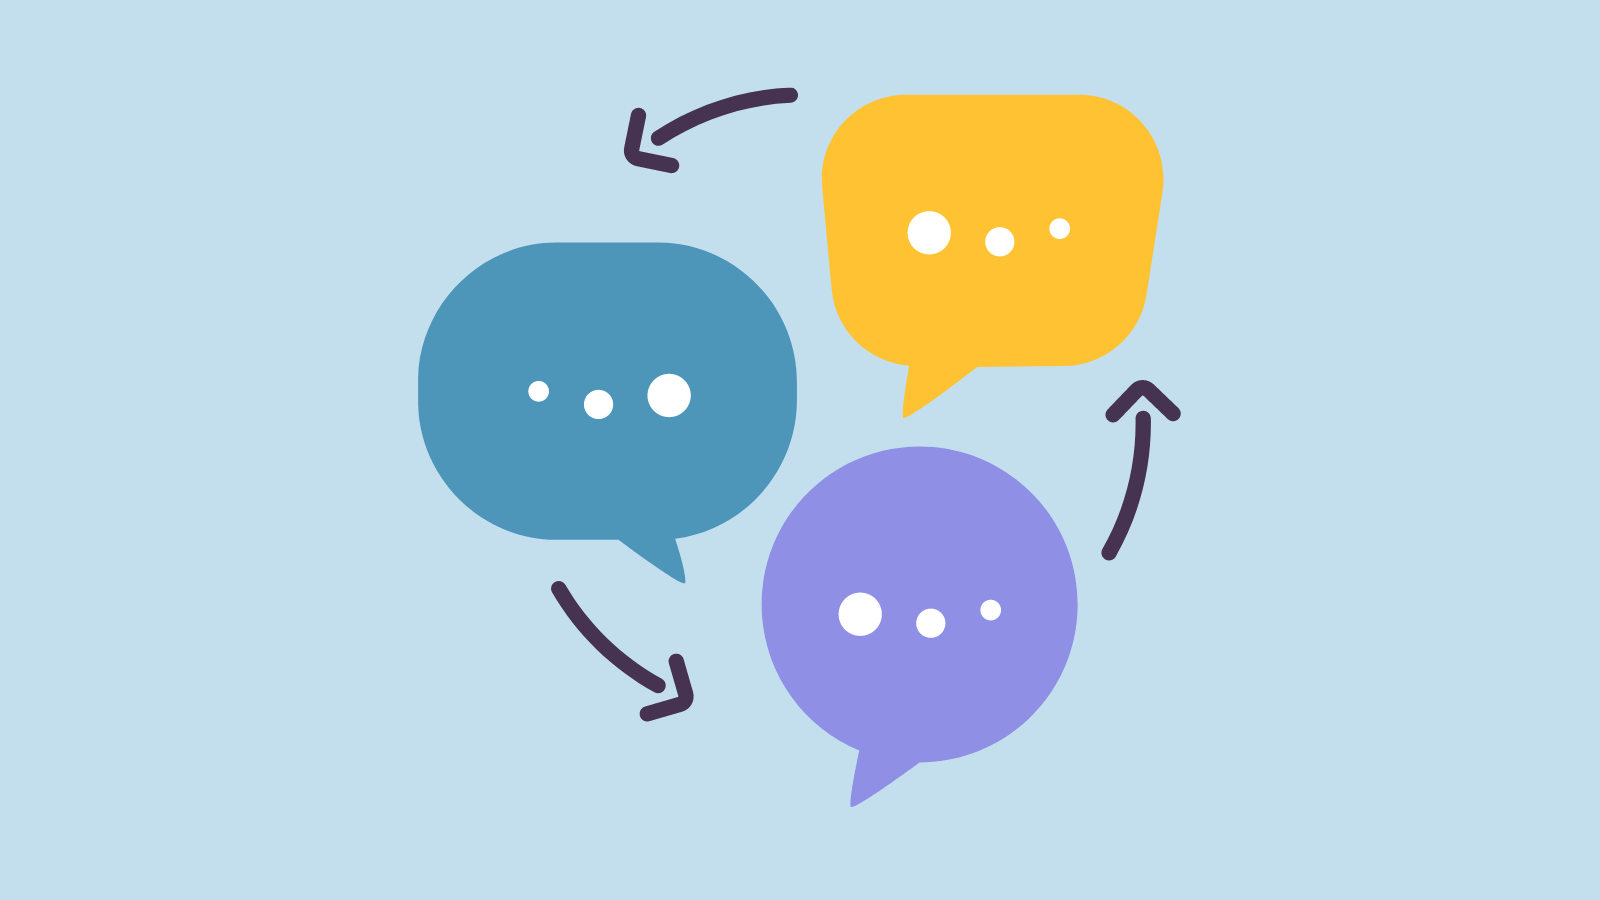 Three speech bubbles with arrows pointing to them